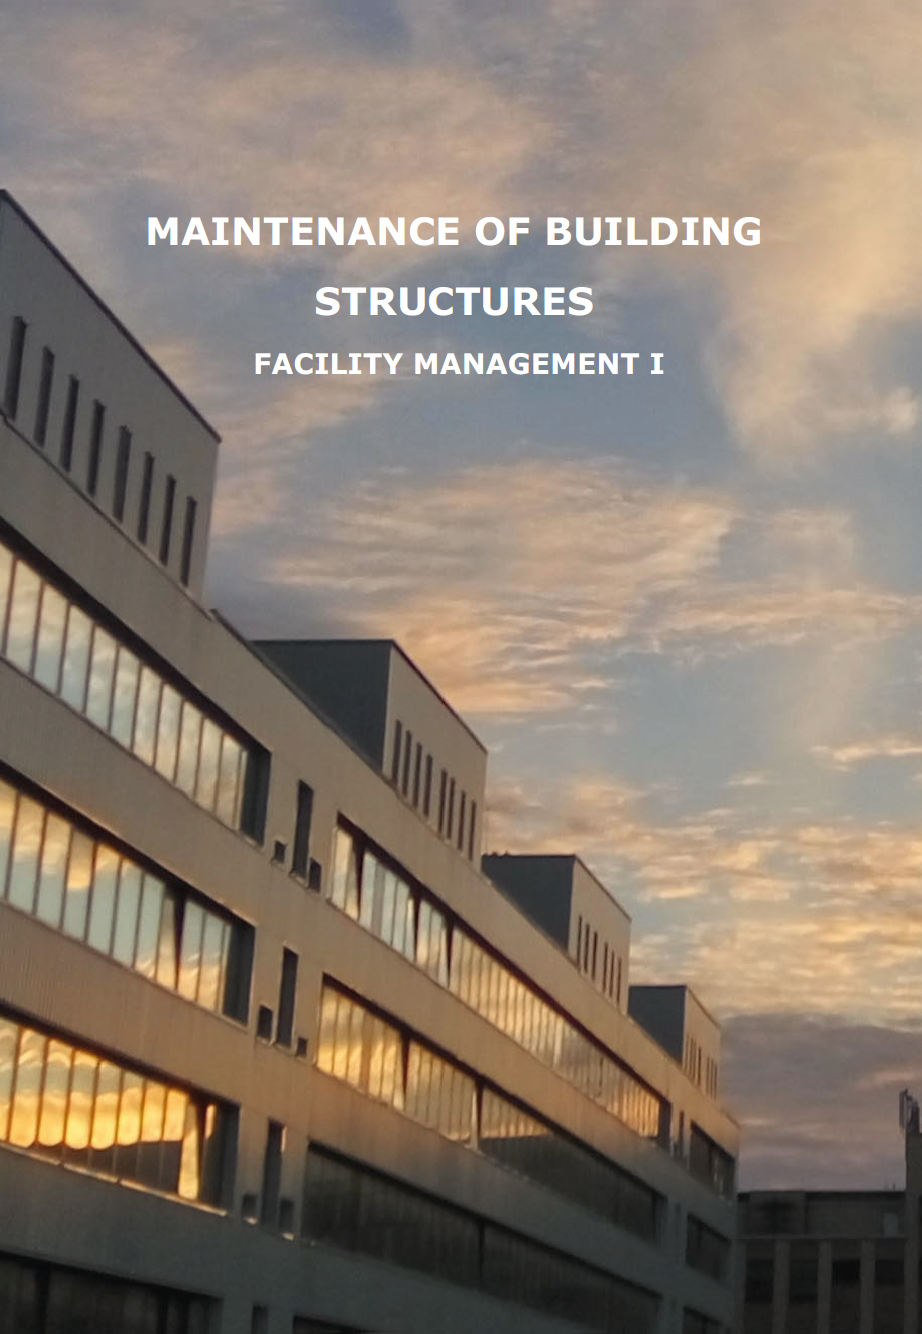 MAINTENANCE OF BUILDING STRUCTURES FACILITY MANAGEMENT I